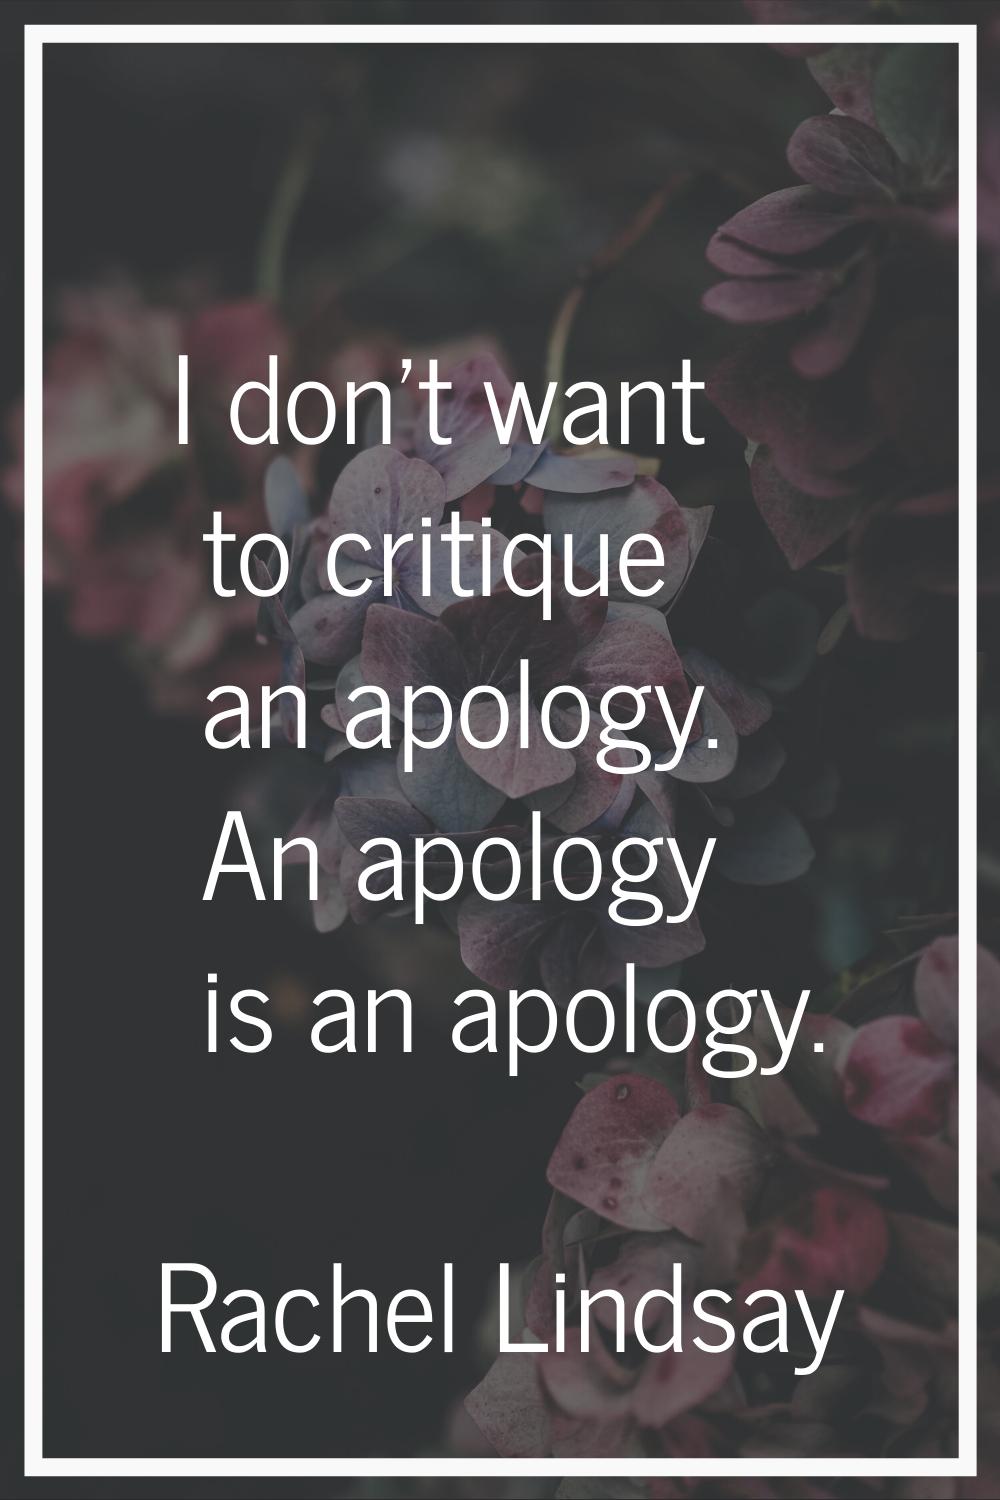 I don't want to critique an apology. An apology is an apology.